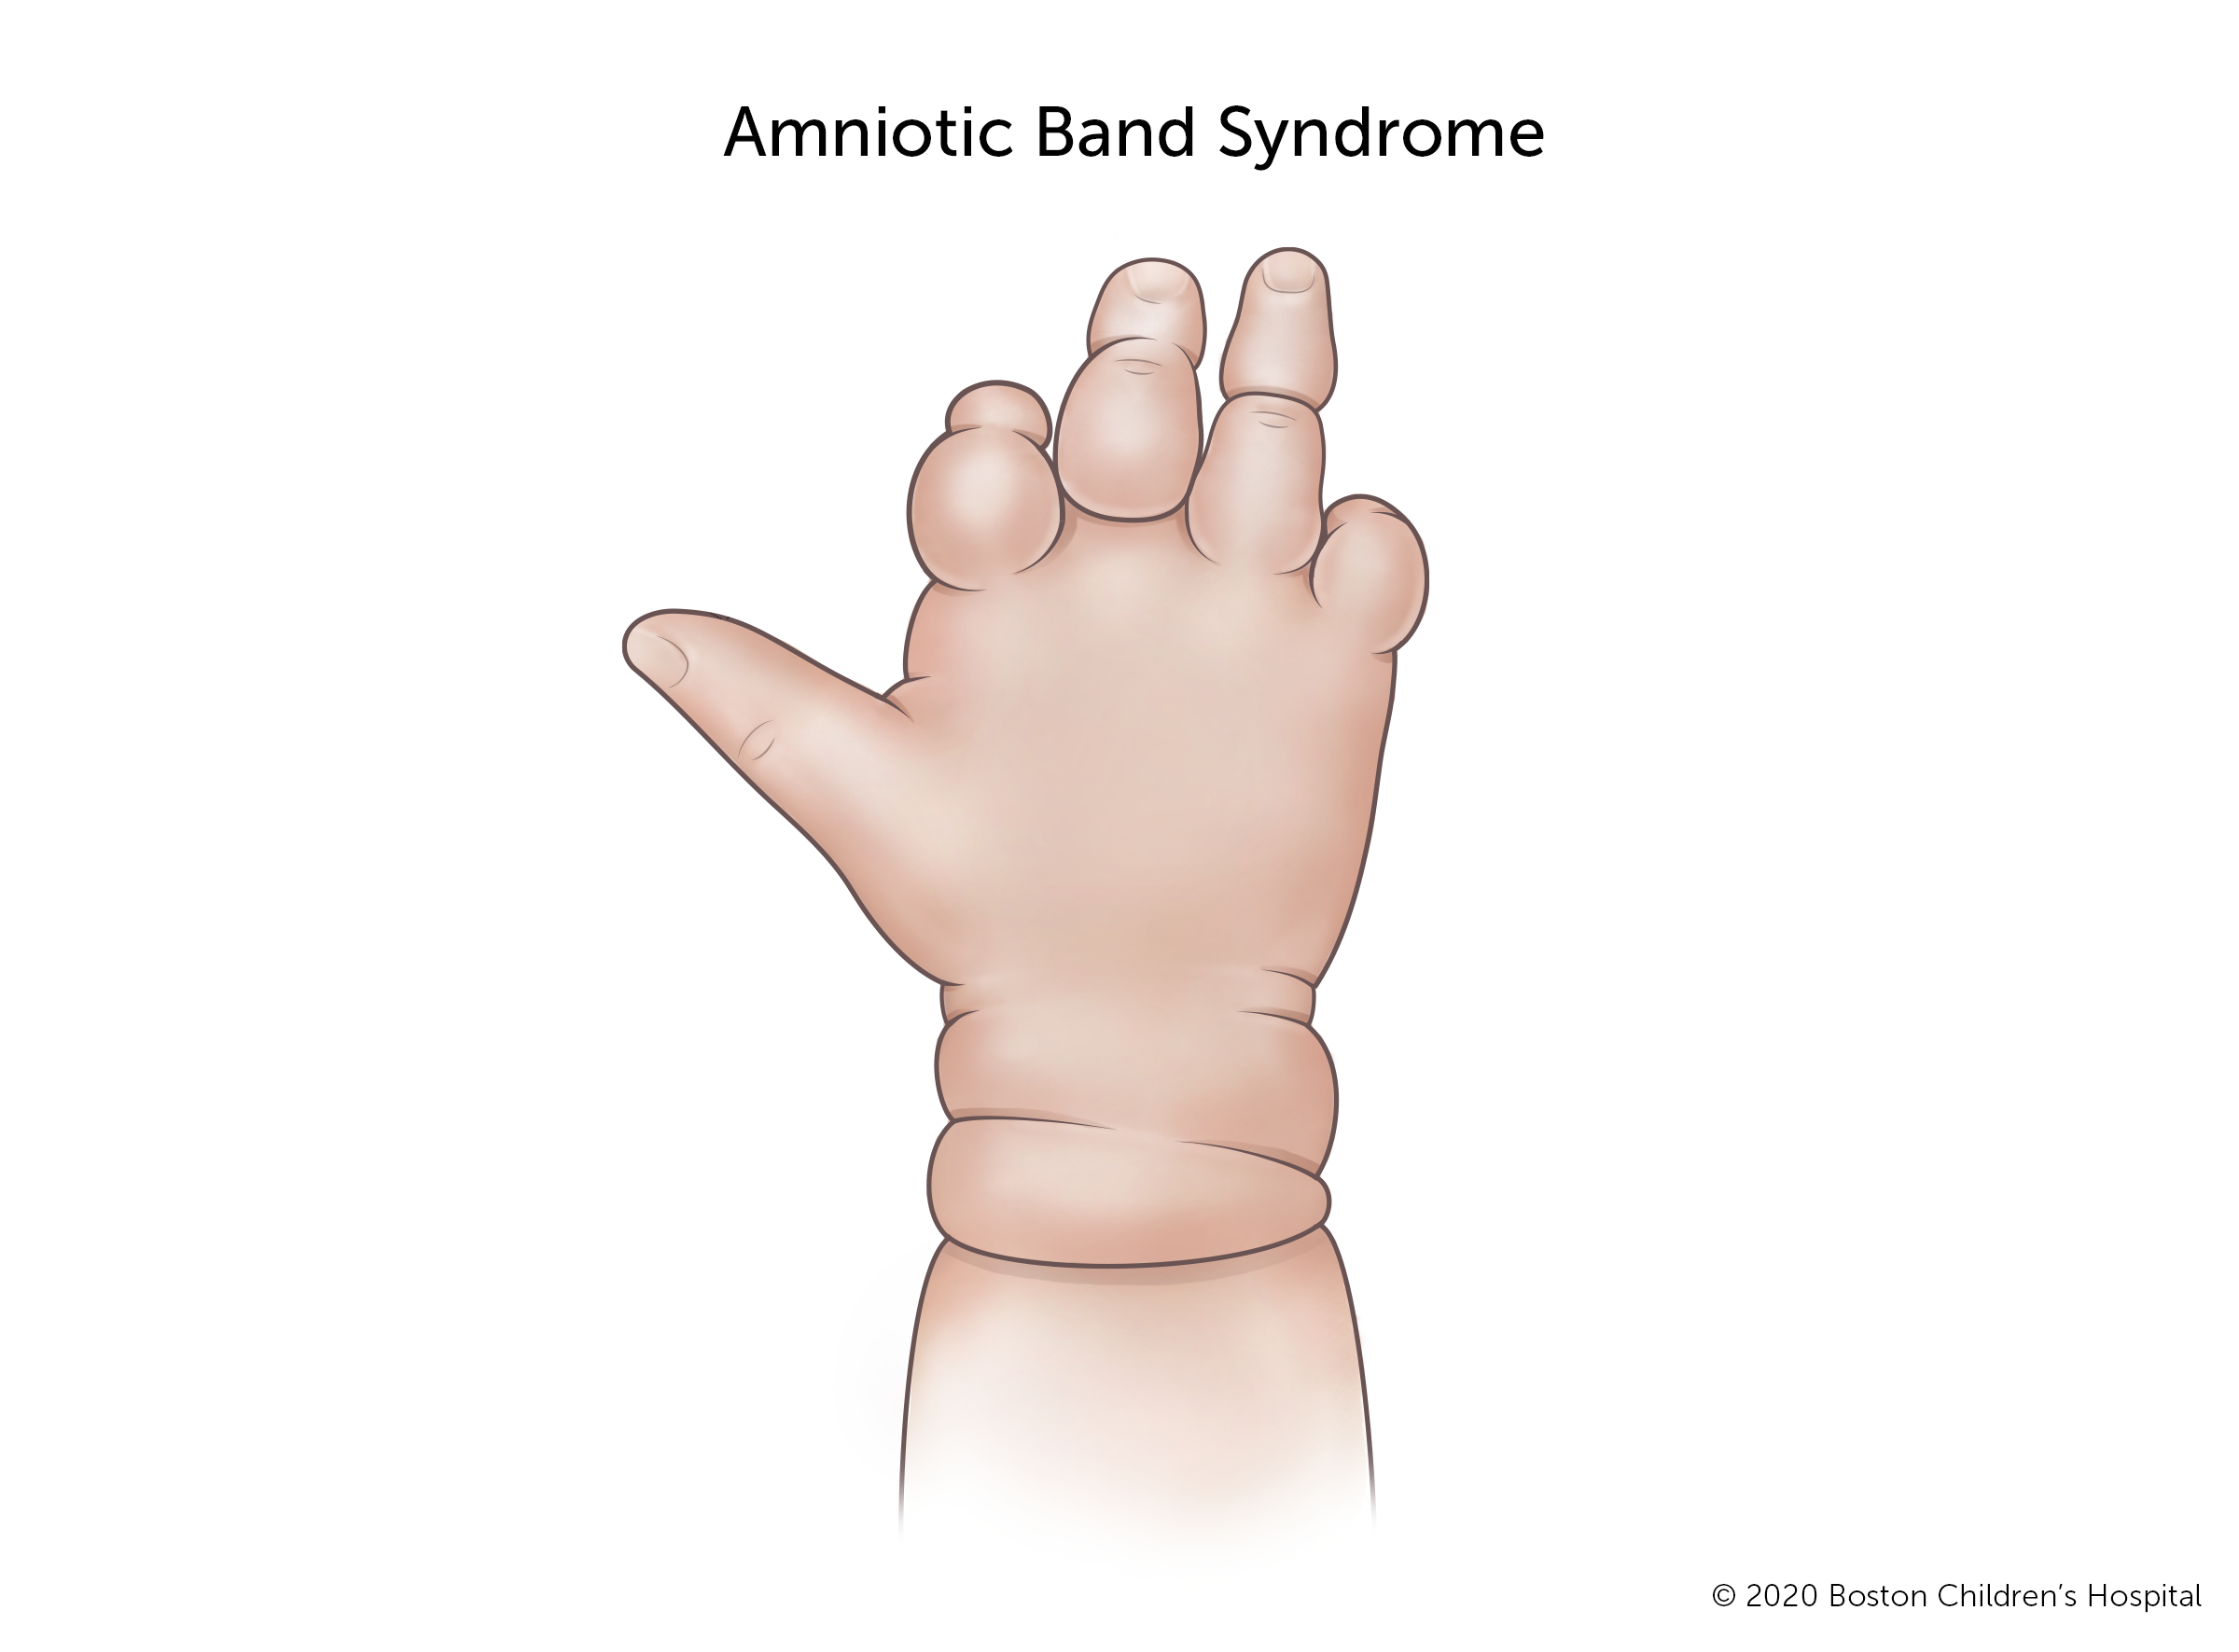 A hand with amniotic band syndrome has indented bands that wrap around the wrist and several fingers. Some of the bands are shallow. Other bands are deep and have changed the shape of the finger.